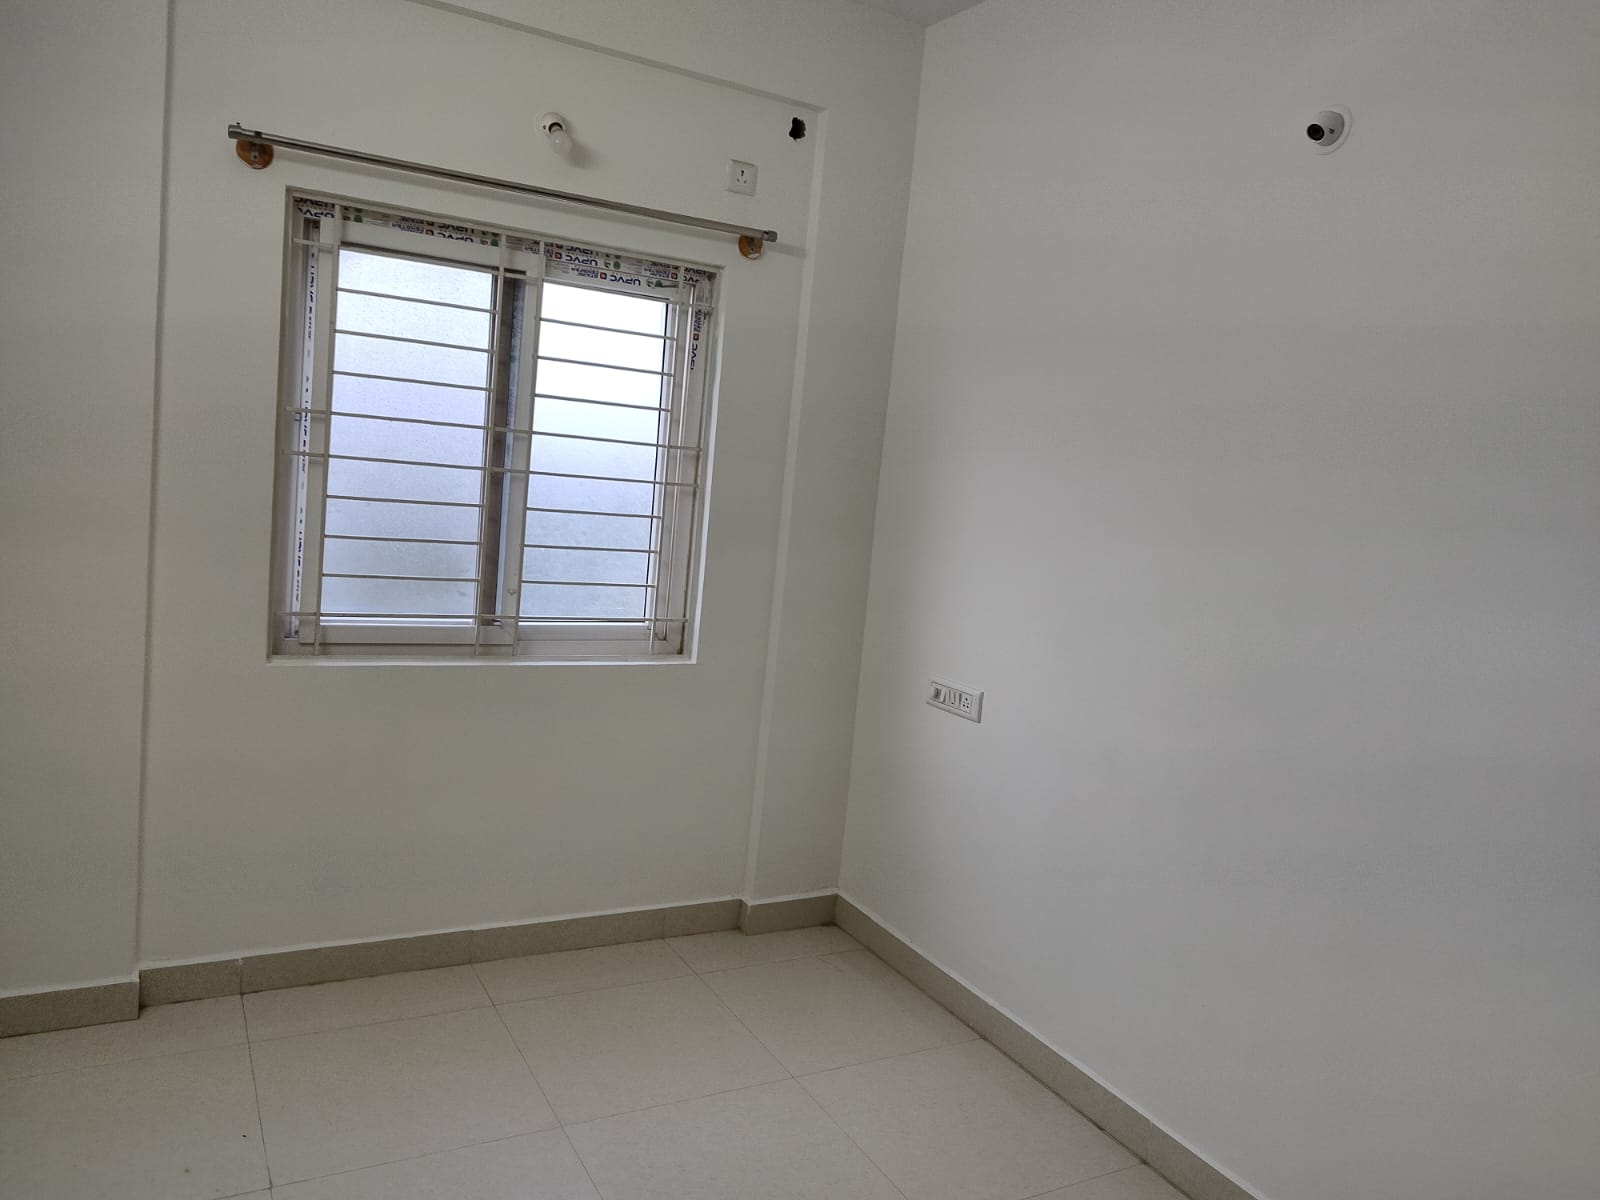 3 BHK Residential Apartment for Lease Only at JAM-6142 in Electronic City Phase I